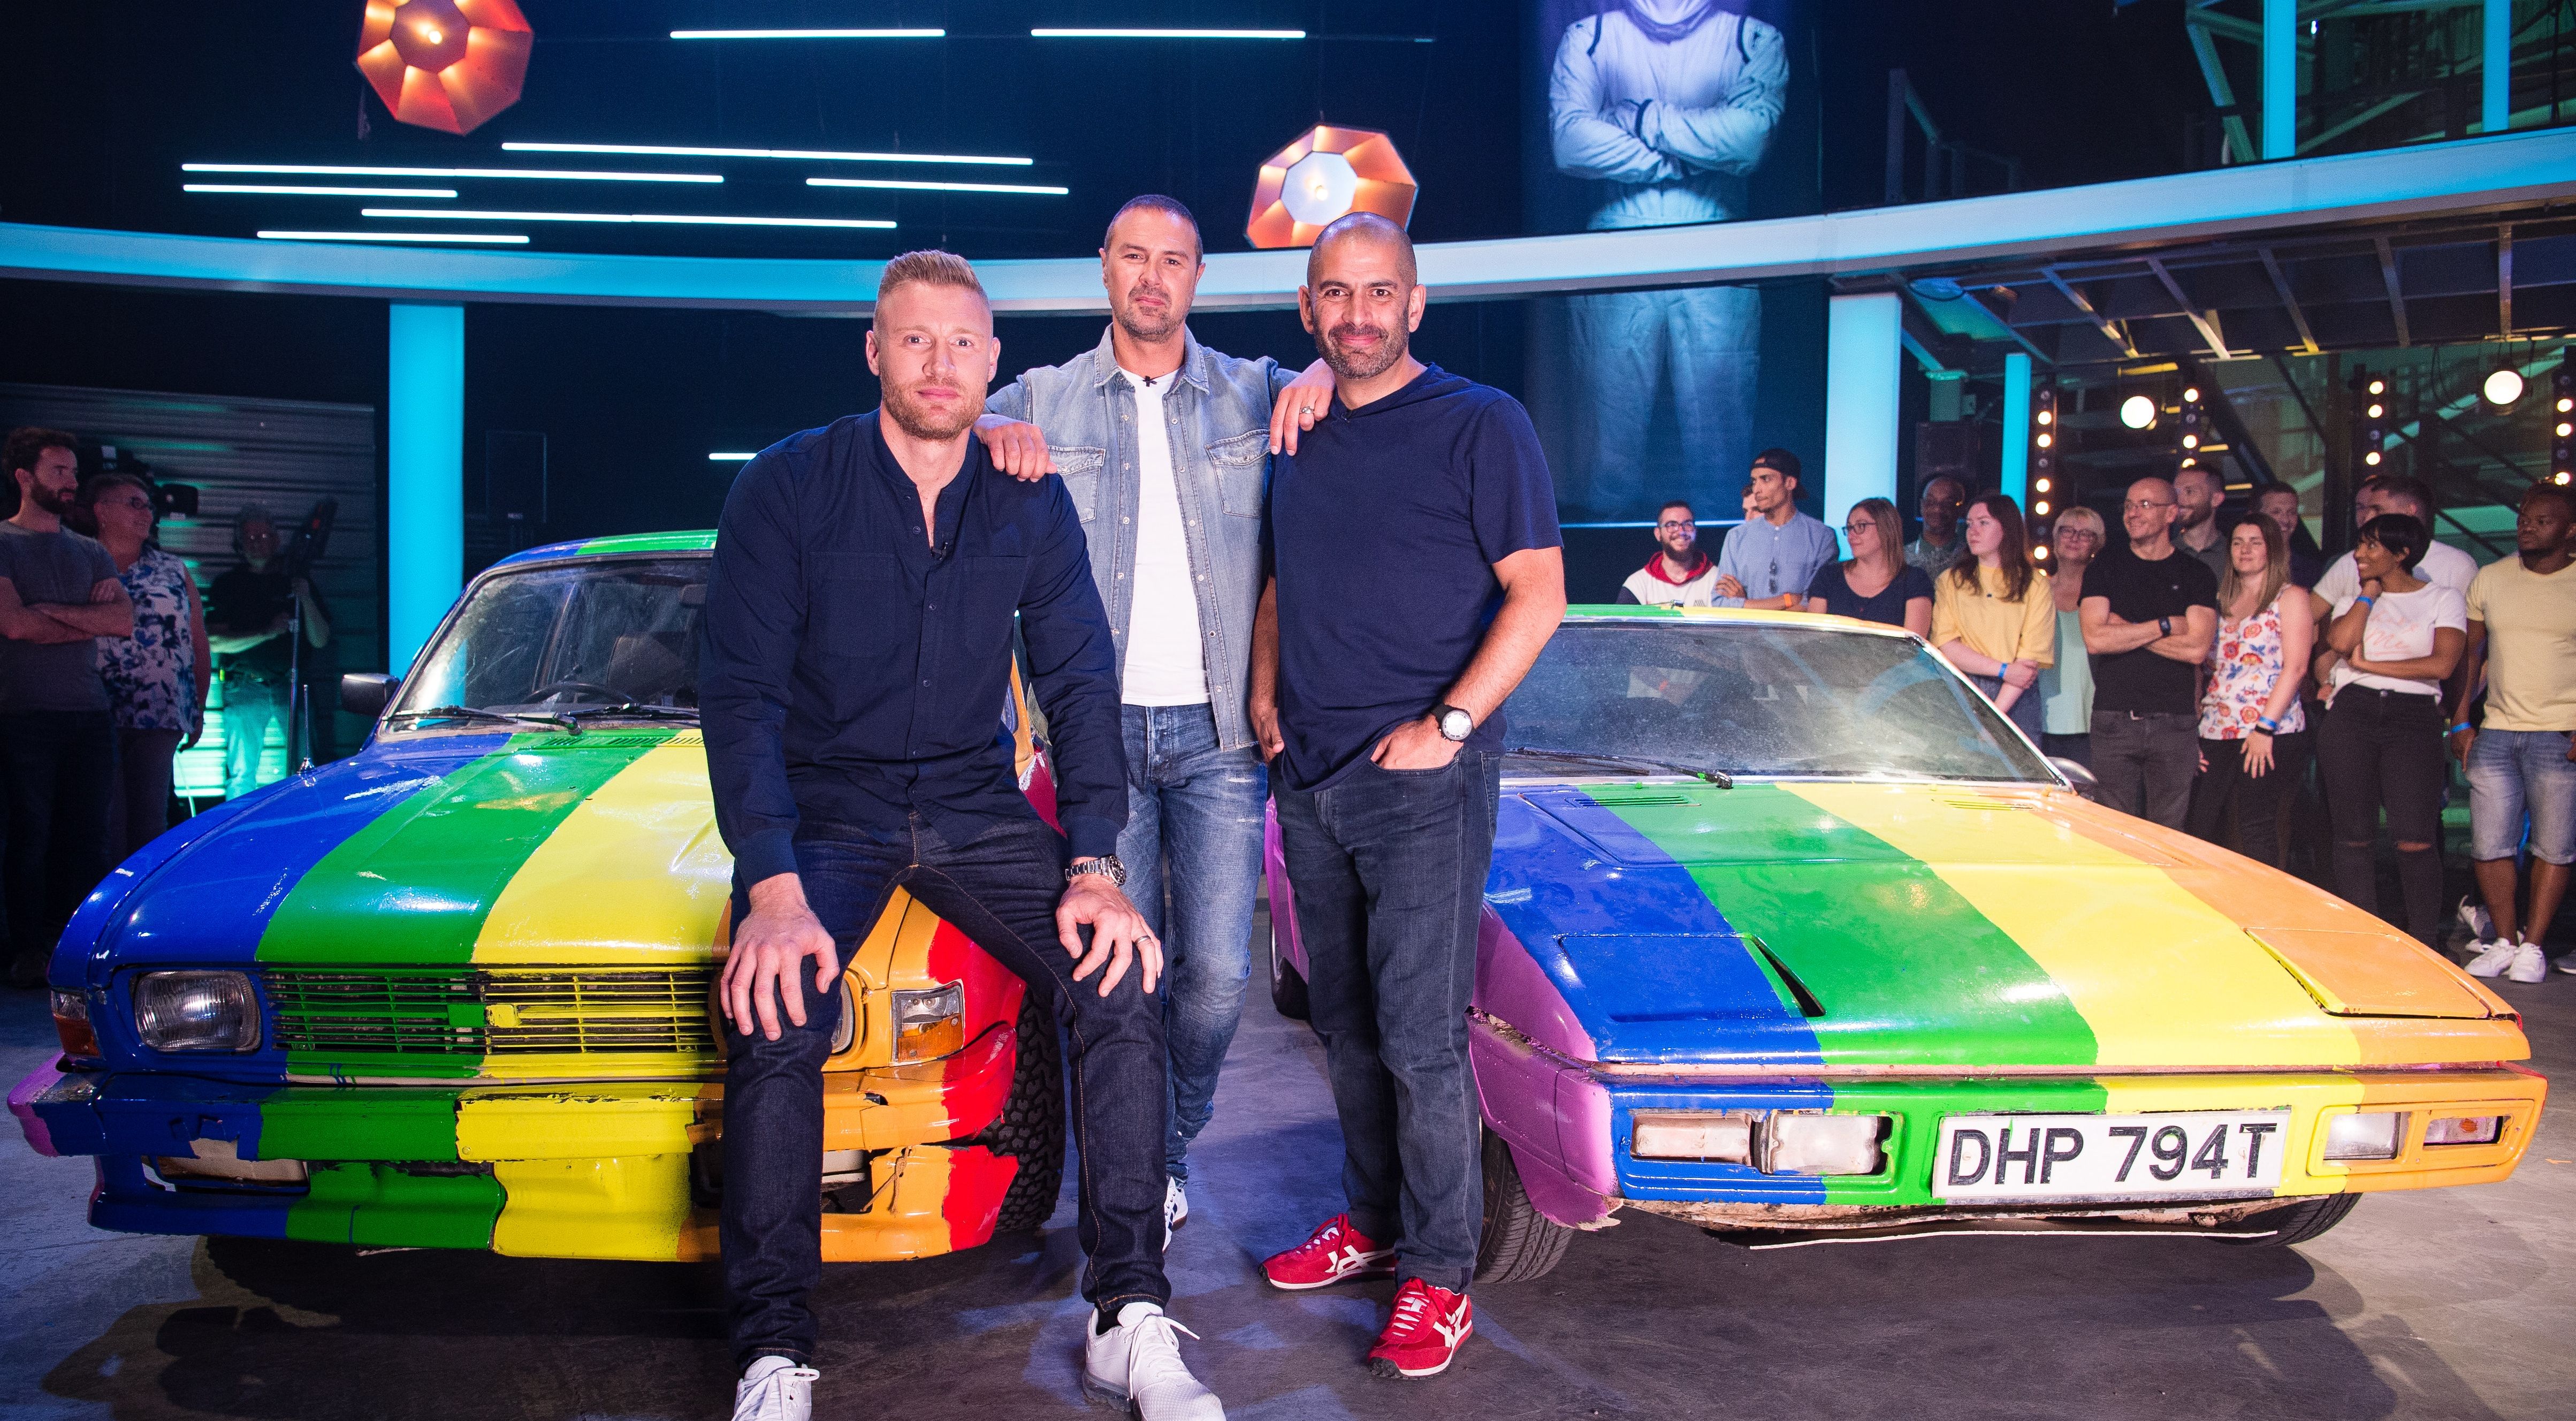 New Top Gear special to air Christmas | BelfastTelegraph.co.uk